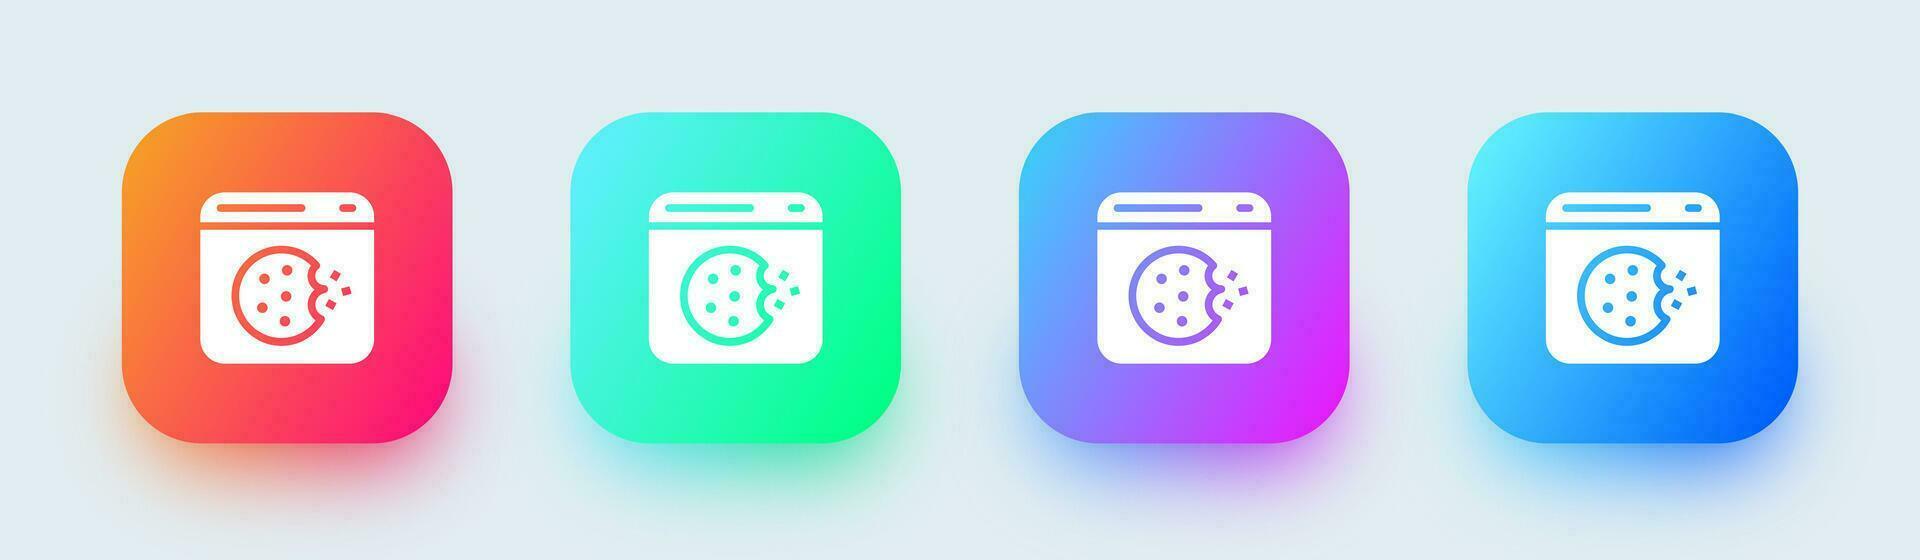 Cookie solid icon in square gradient colors. Web data signs vector illustration.